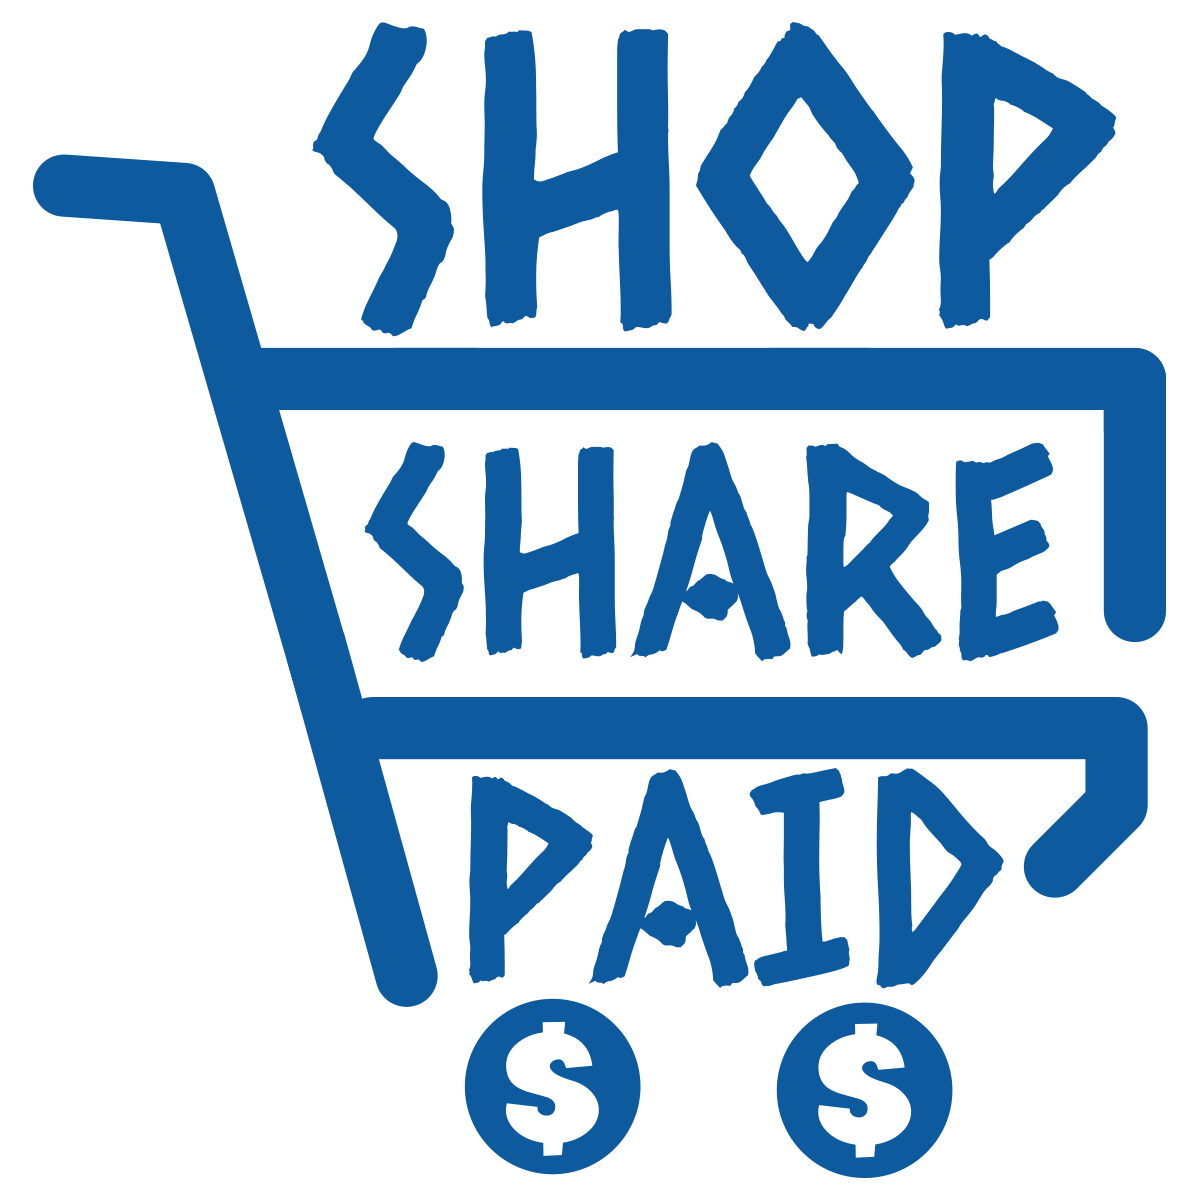 Share pay. Shopping share.